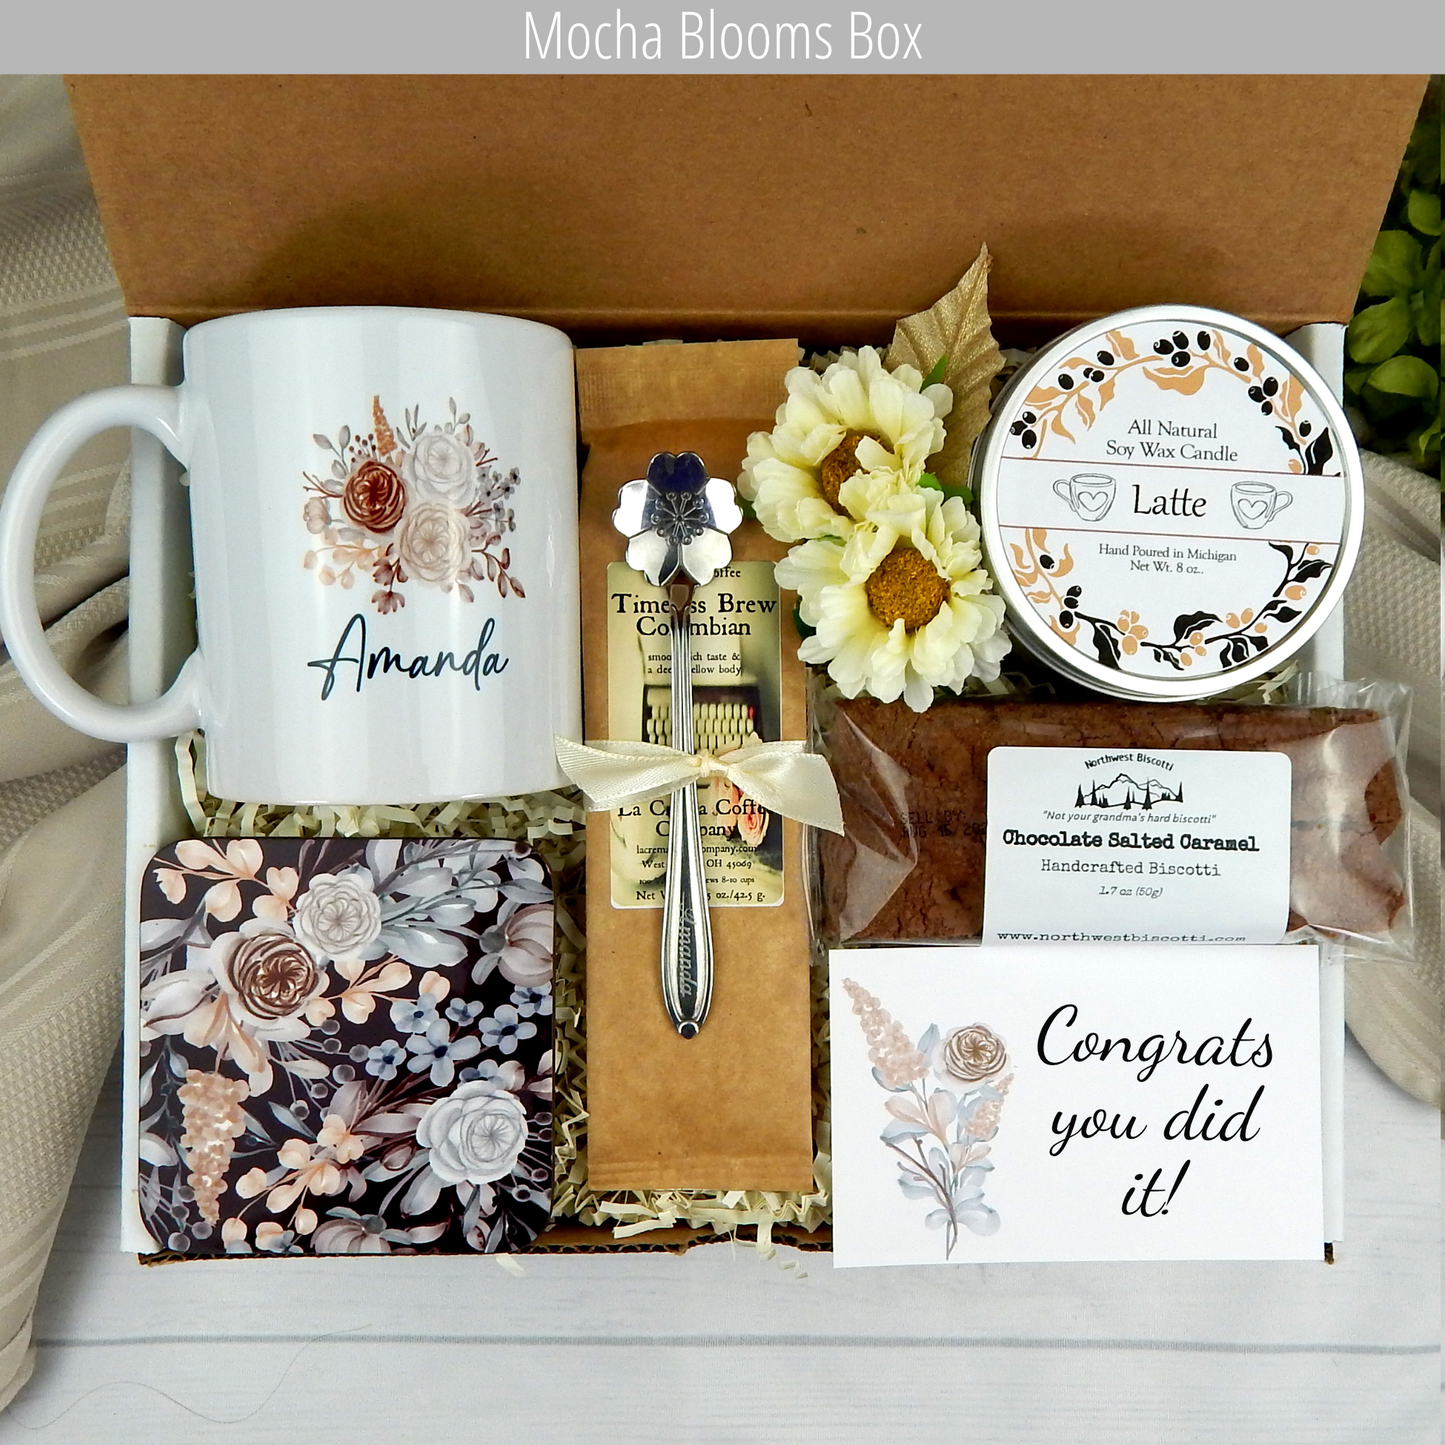 Commemorate milestones with a personalized name mug and treats.